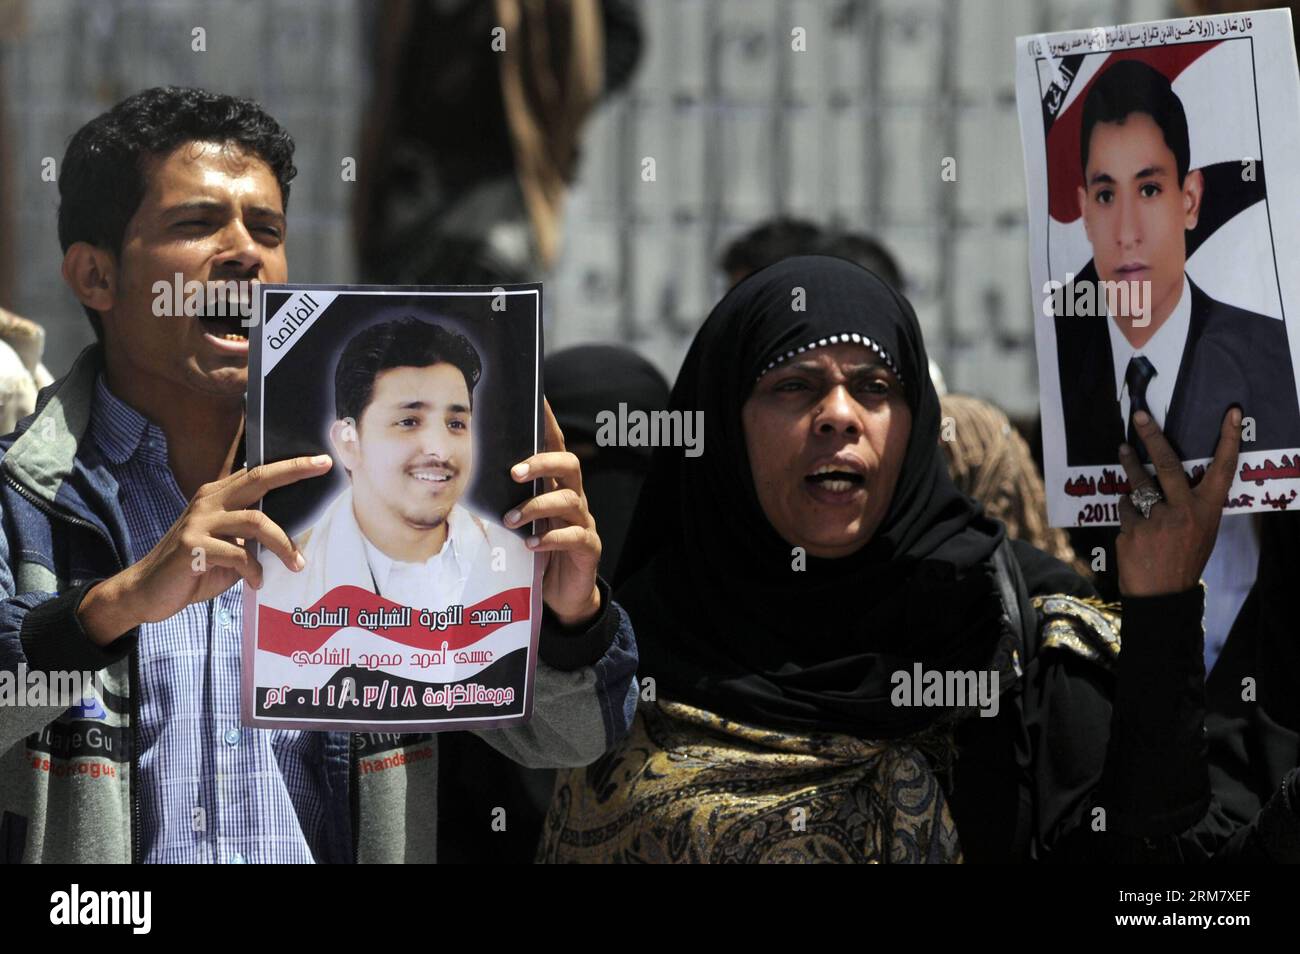 (140318) -- SANAA, March 18, 2014 (Xinhua) -- Yemeni people hold pictures of slain anti-government protesters in Sanaa, Yemen, on March 18, 2014, as they commemorate the third anniversary of an attack on anti-government protesters in a protest against former Yemeni President Ali Abdullah Saleh that left more than 50 people dead and about 400 others wounded in 2011.(Xinhua/Mohammed Mohammed) YEMEN-SANAA-PROTEST PUBLICATIONxNOTxINxCHN   Sanaa March 18 2014 XINHUA Yemeni Celebrities Hold Pictures of Slain Anti Government protesters in Sanaa Yemen ON March 18 2014 As They commemorate The Third Ann Stock Photo